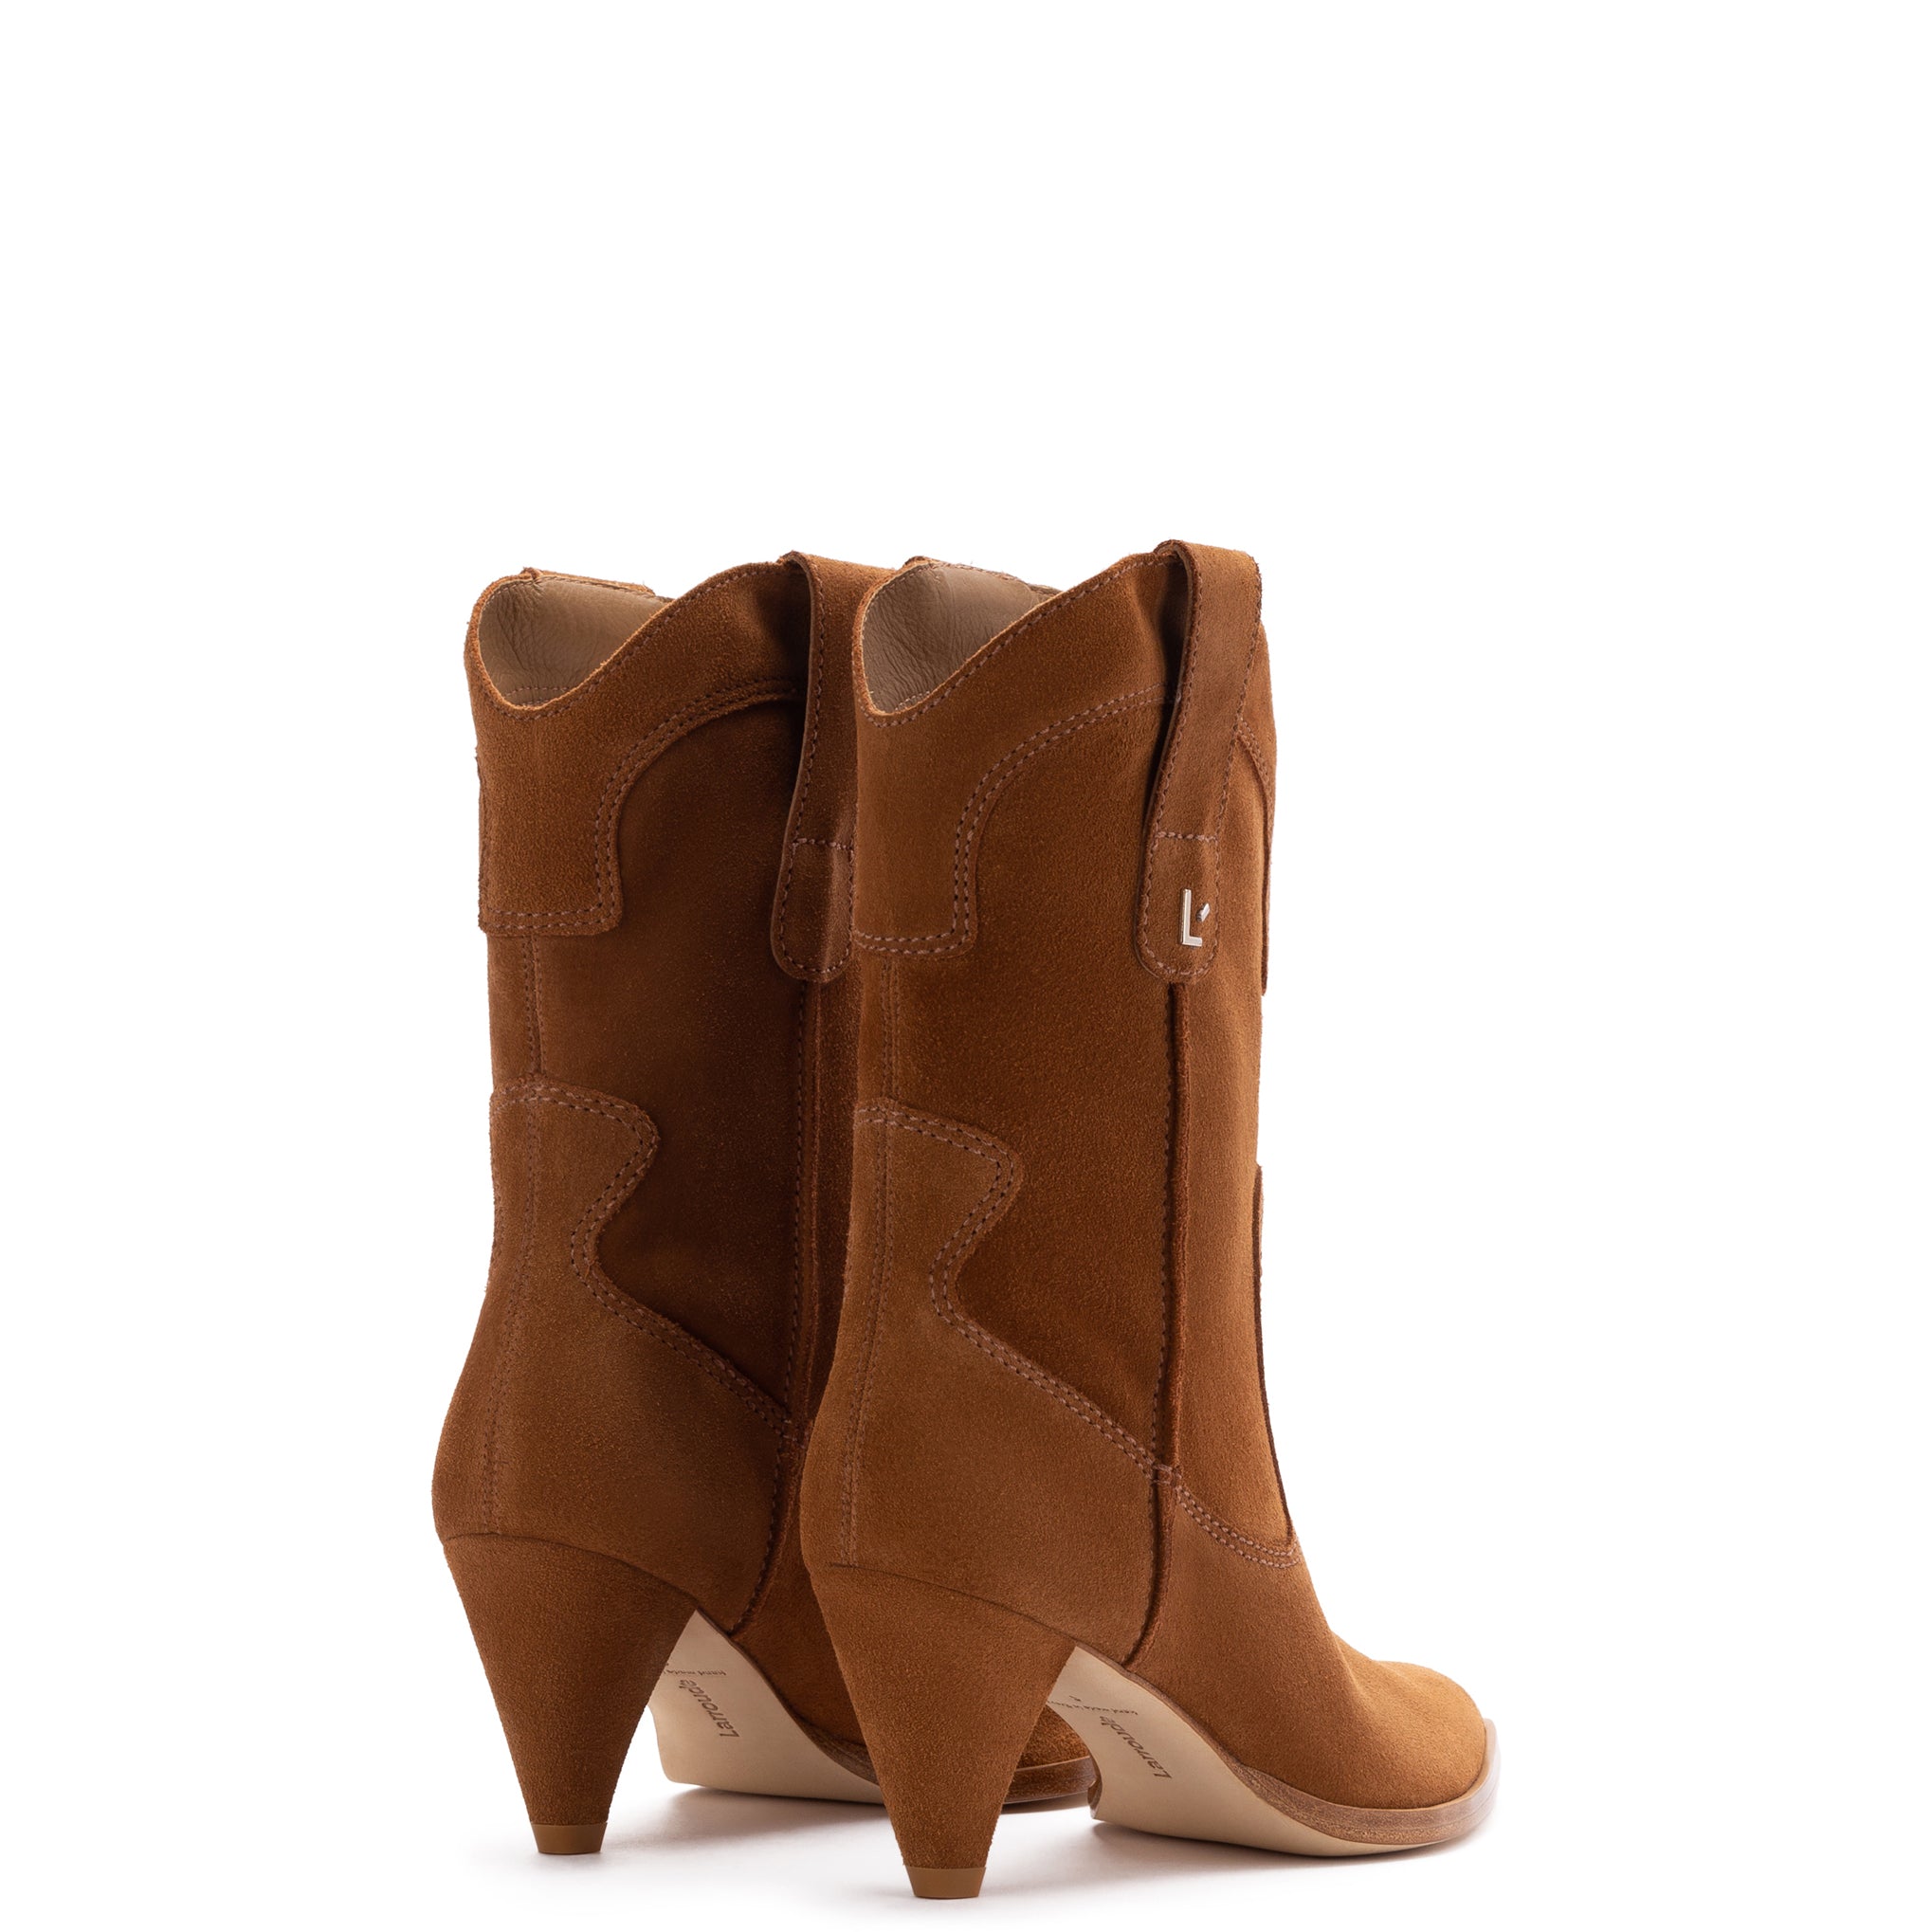 Thelma Boot In Tobacco Suede